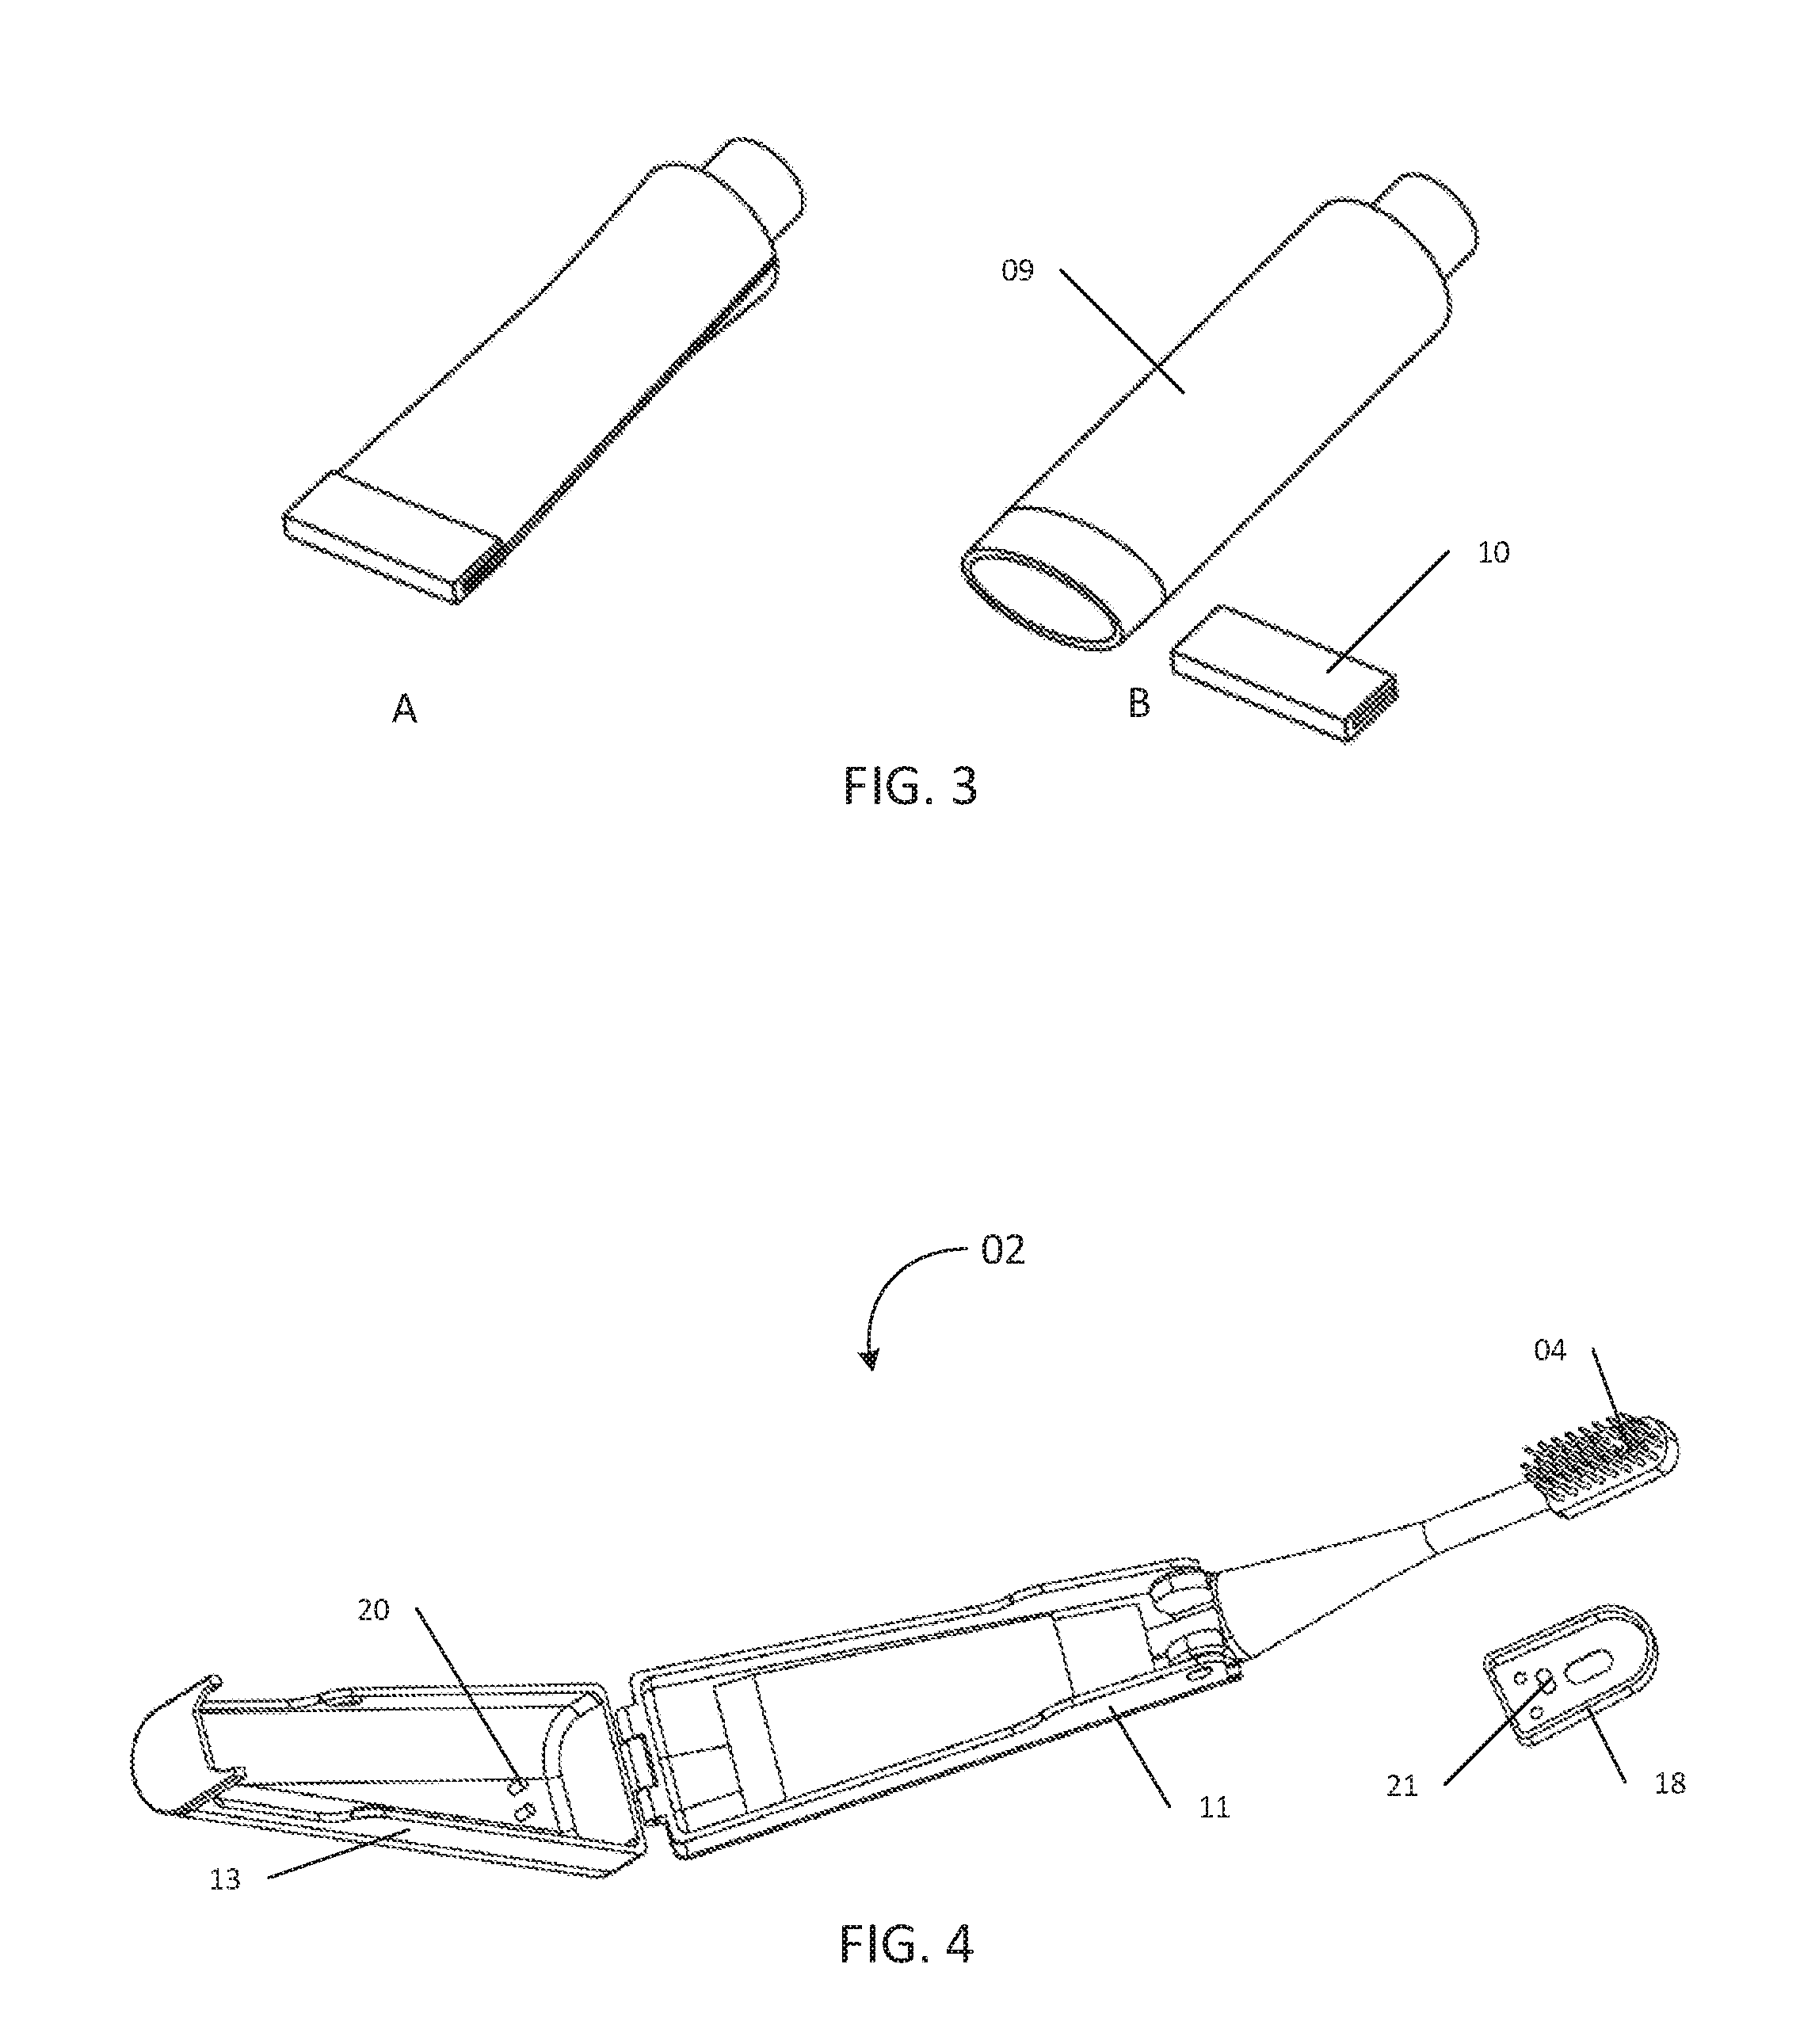 Foldable toothbrush with integrated toothpaste container and oral care kit